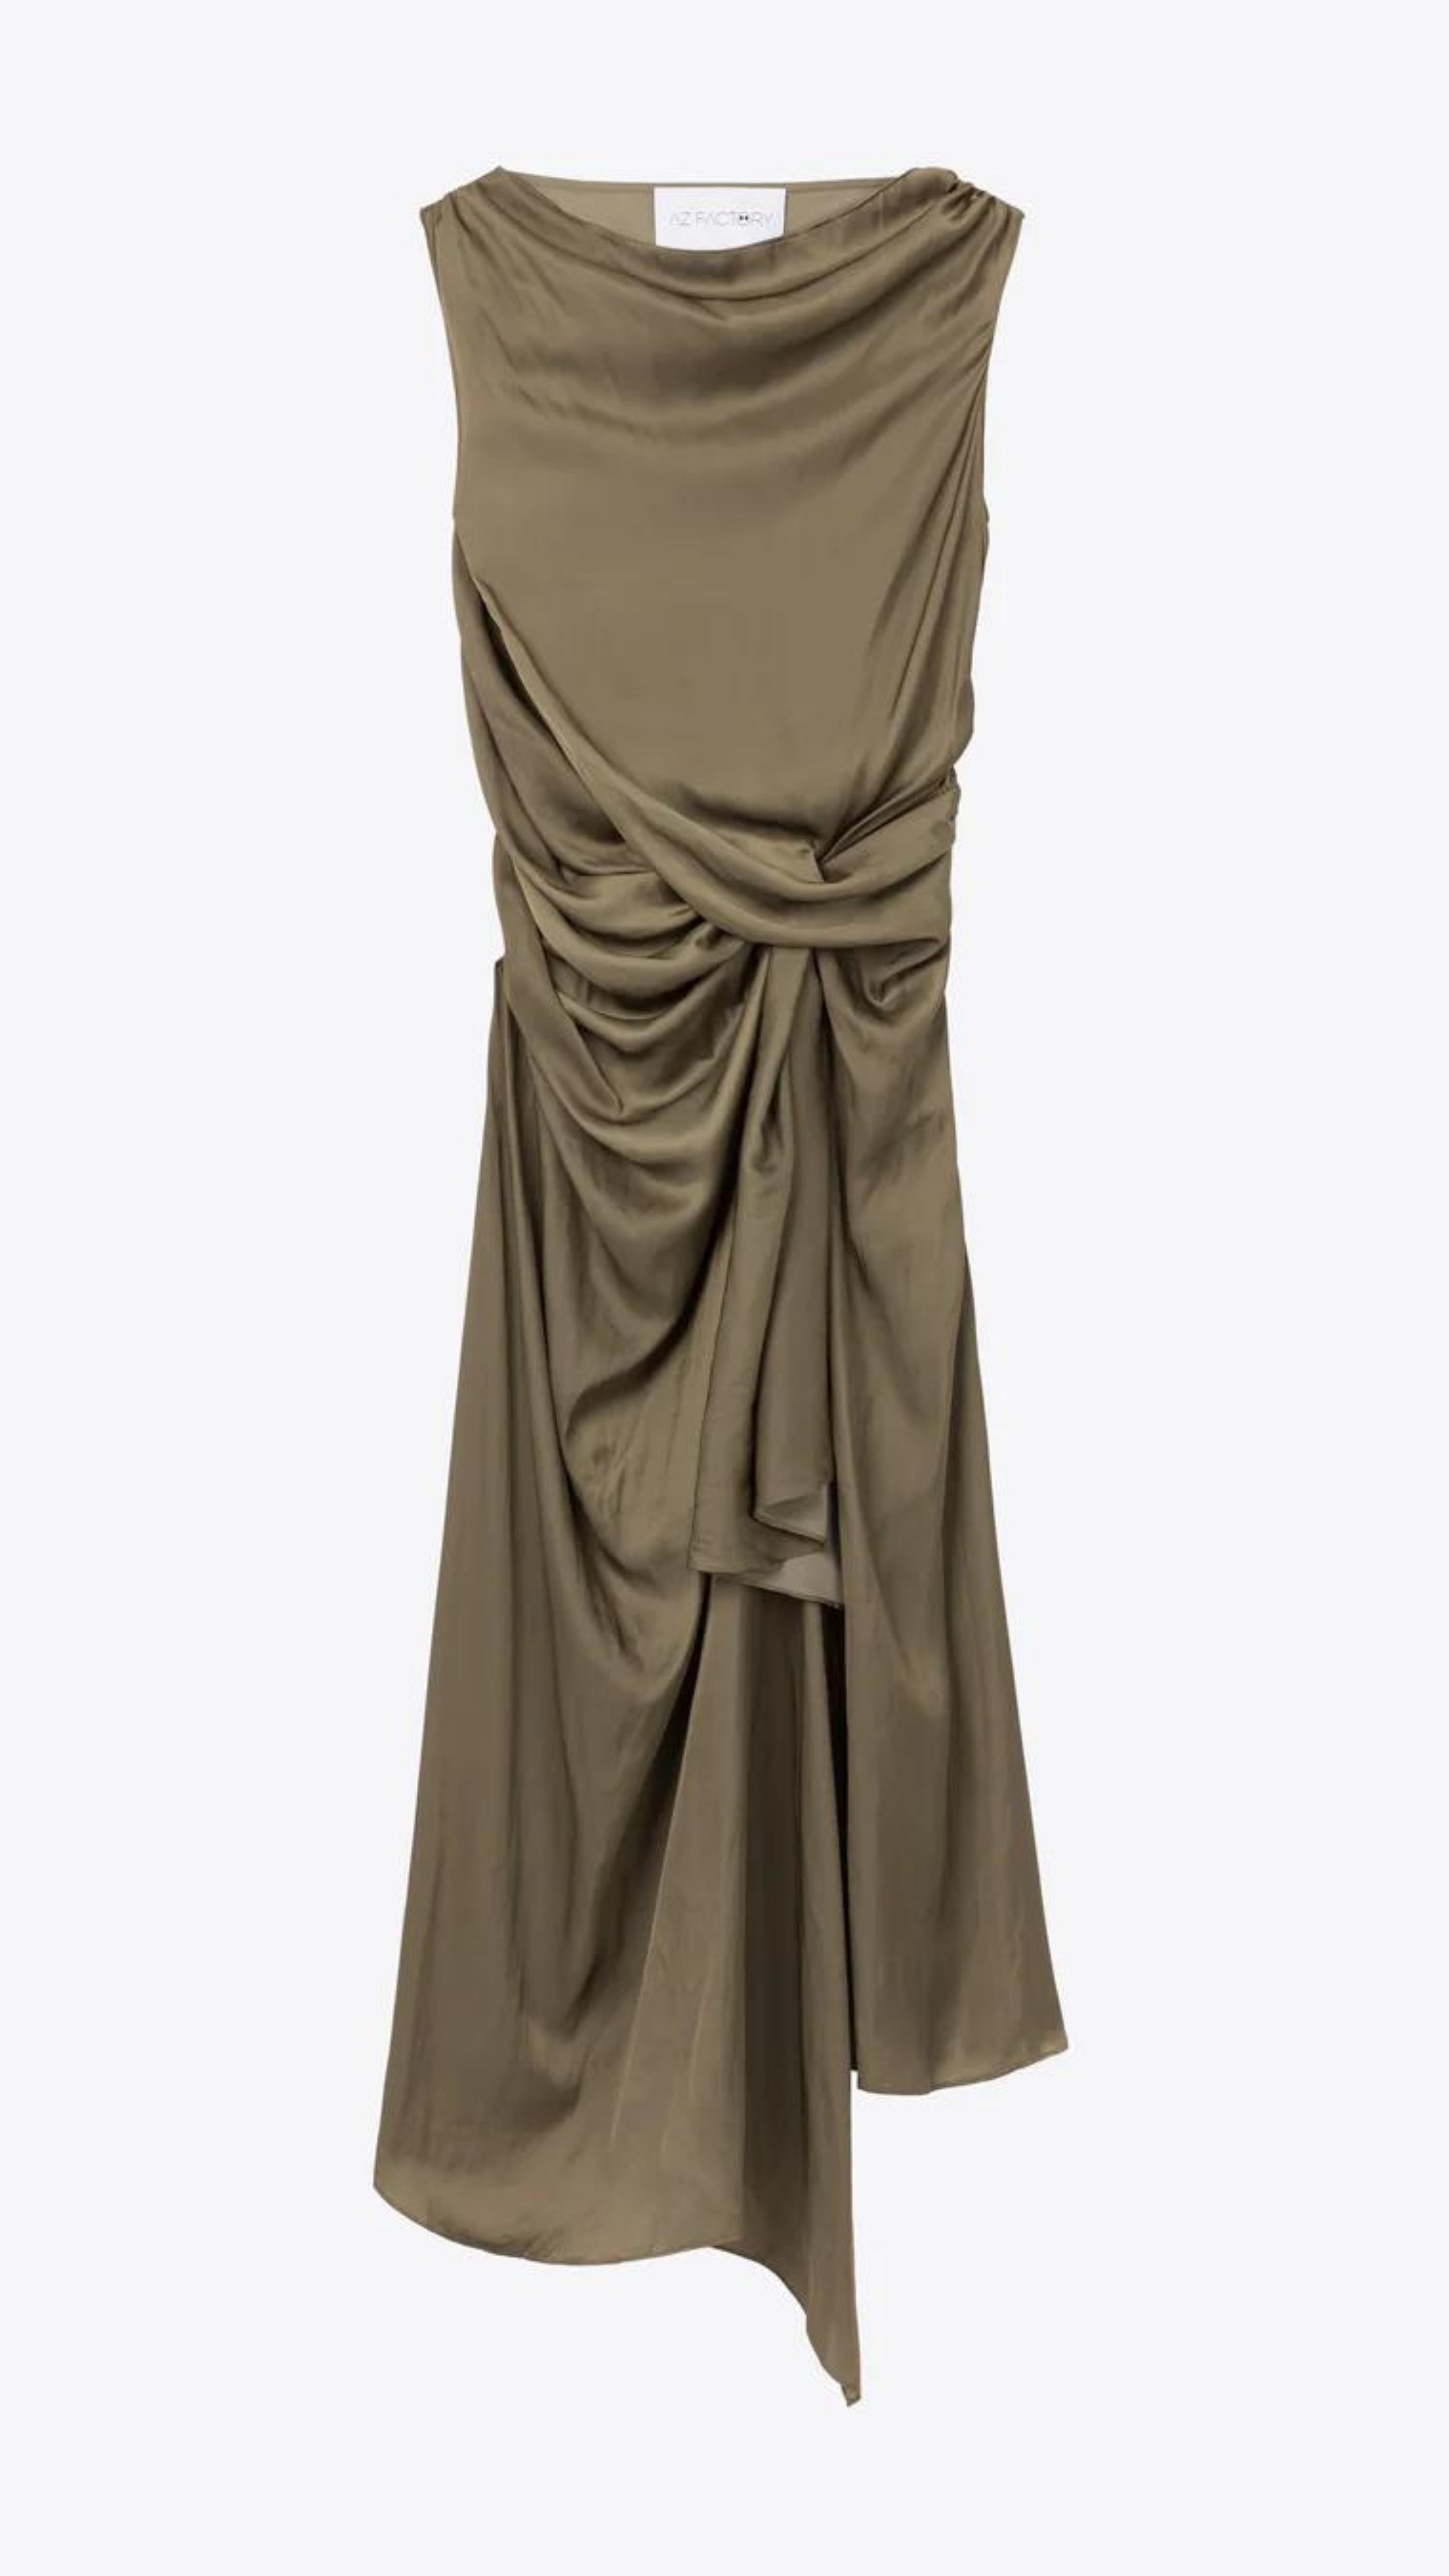 AZ Factory Colville Molly Molloy Lucinda Chambers, Sleeveless Draped Dress in Khaki An elegant olive green formal dress with a silhouette defined by a straight neckline and asymmetrical hemline. The waistline has detailed draping and the front leg as a slit. Front product photo